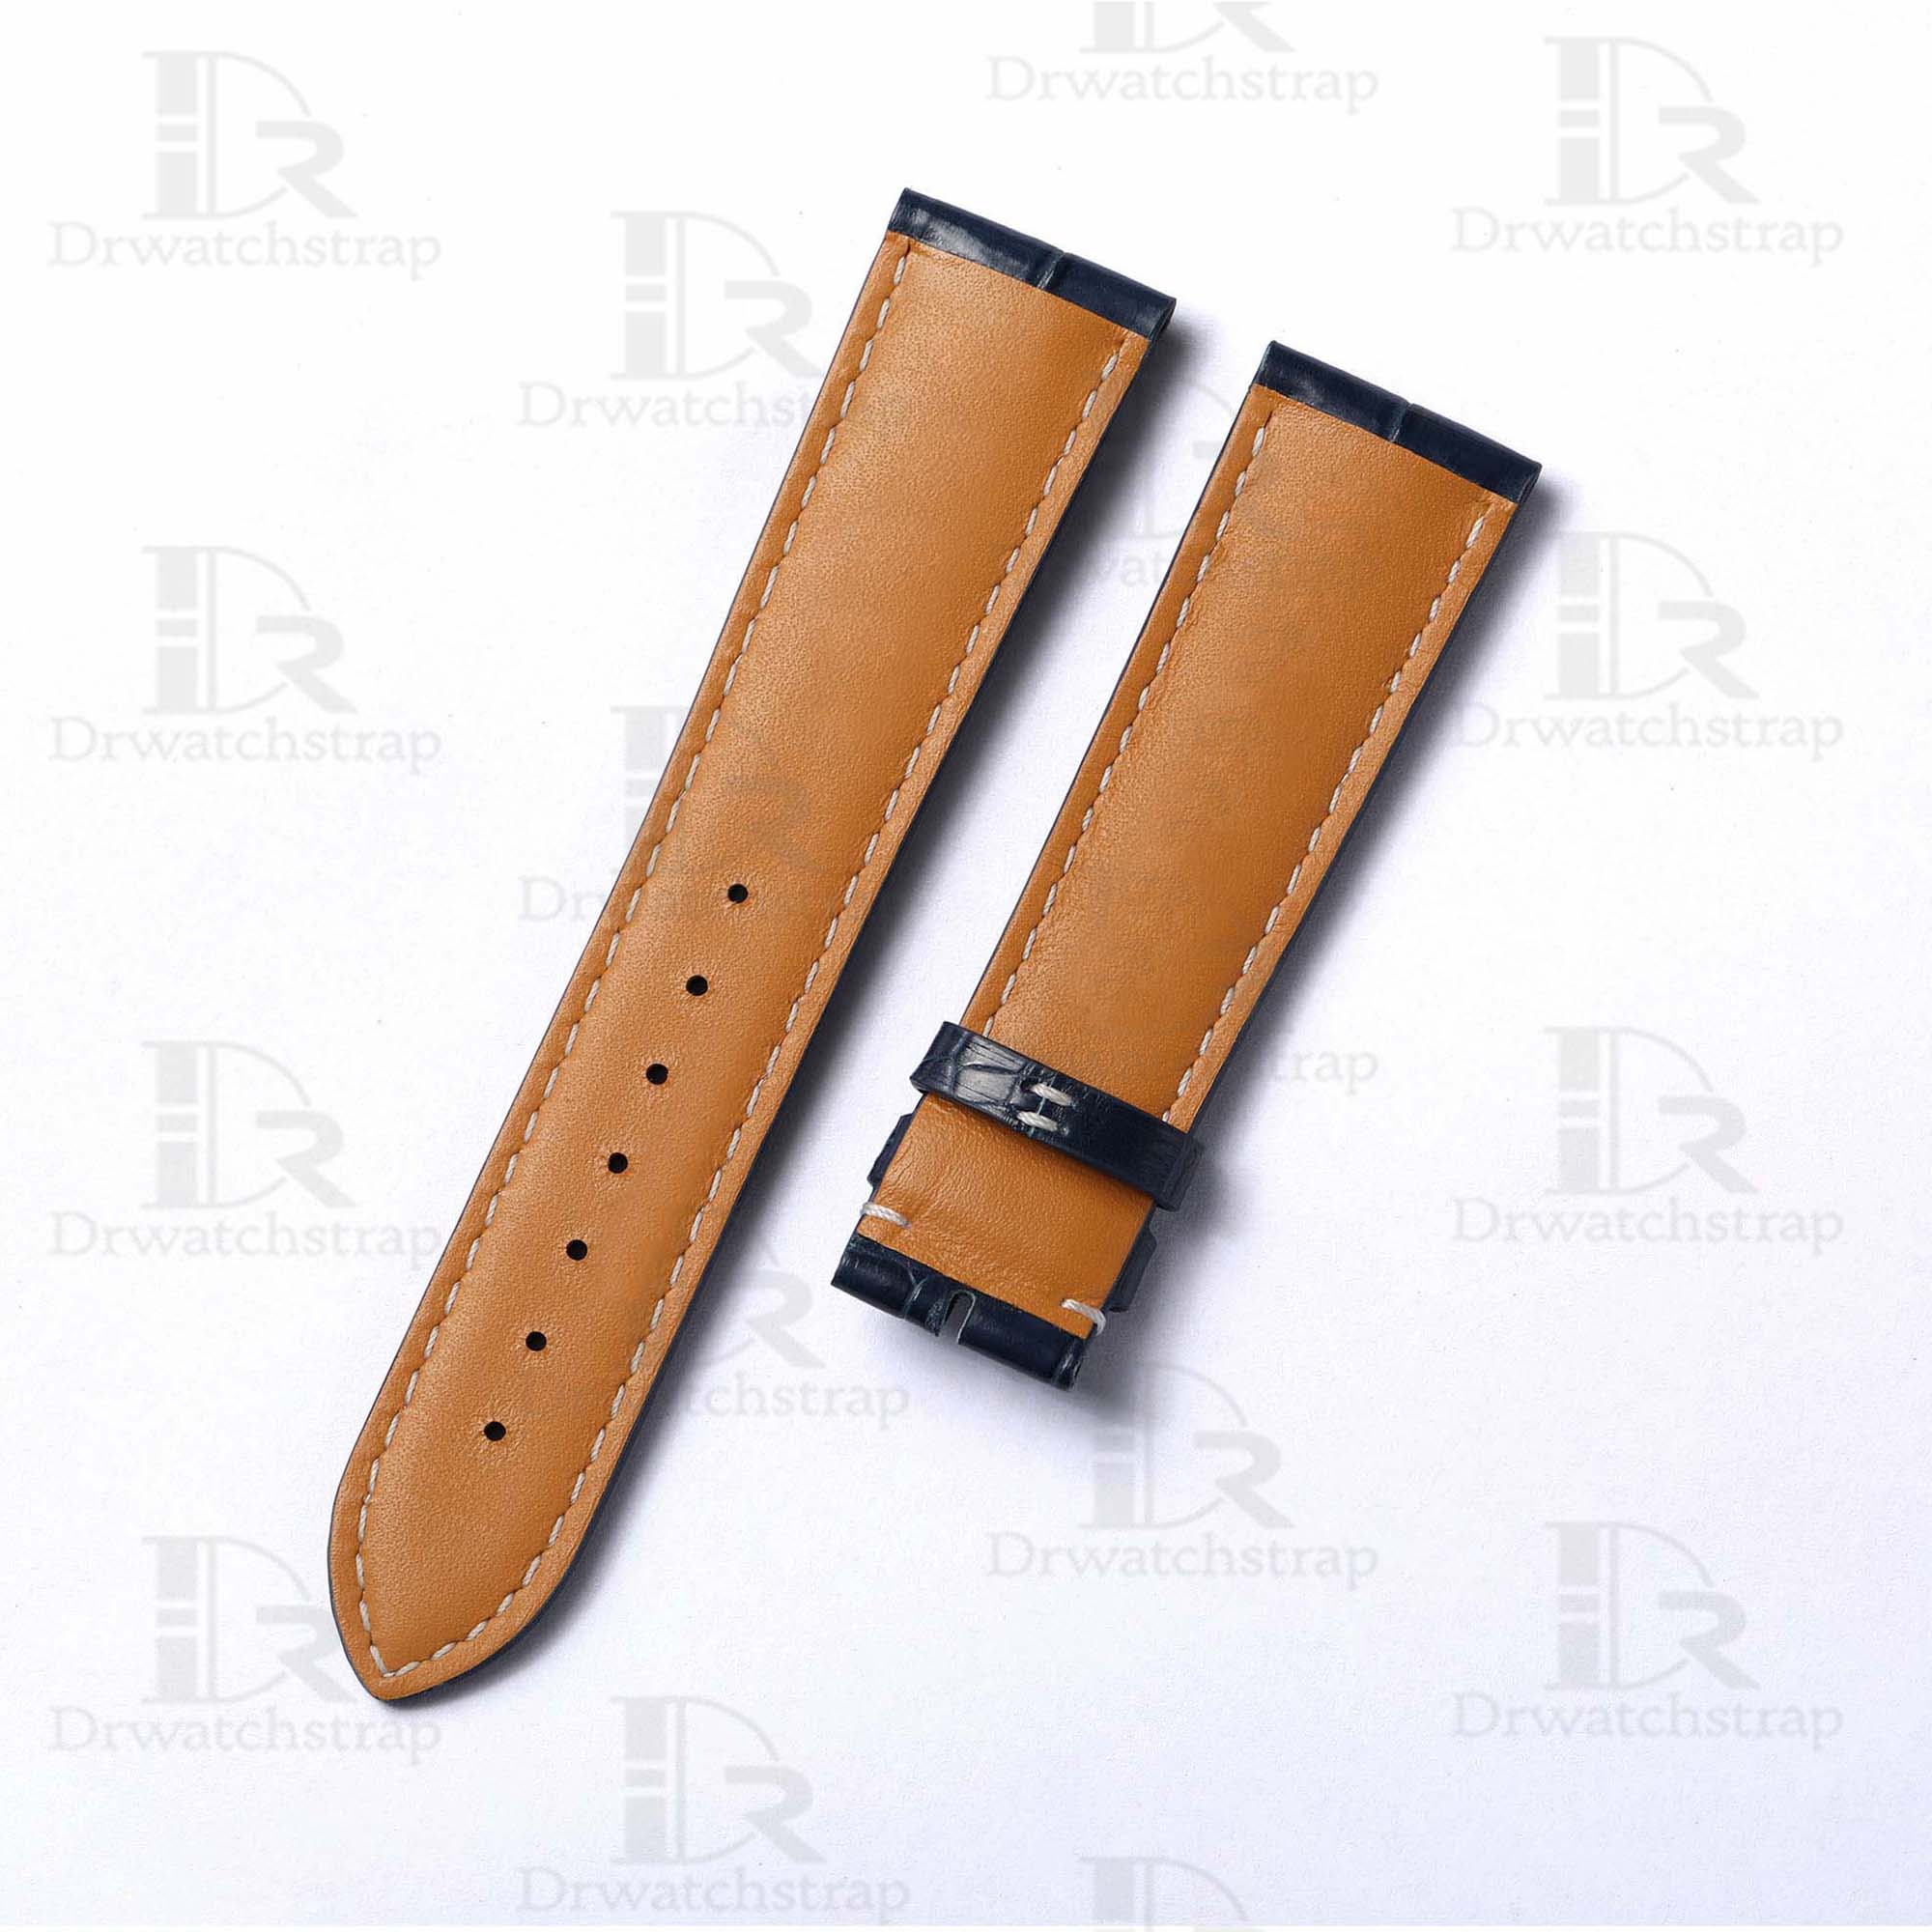 Water-resistant linning buttom with premium calfskin leather